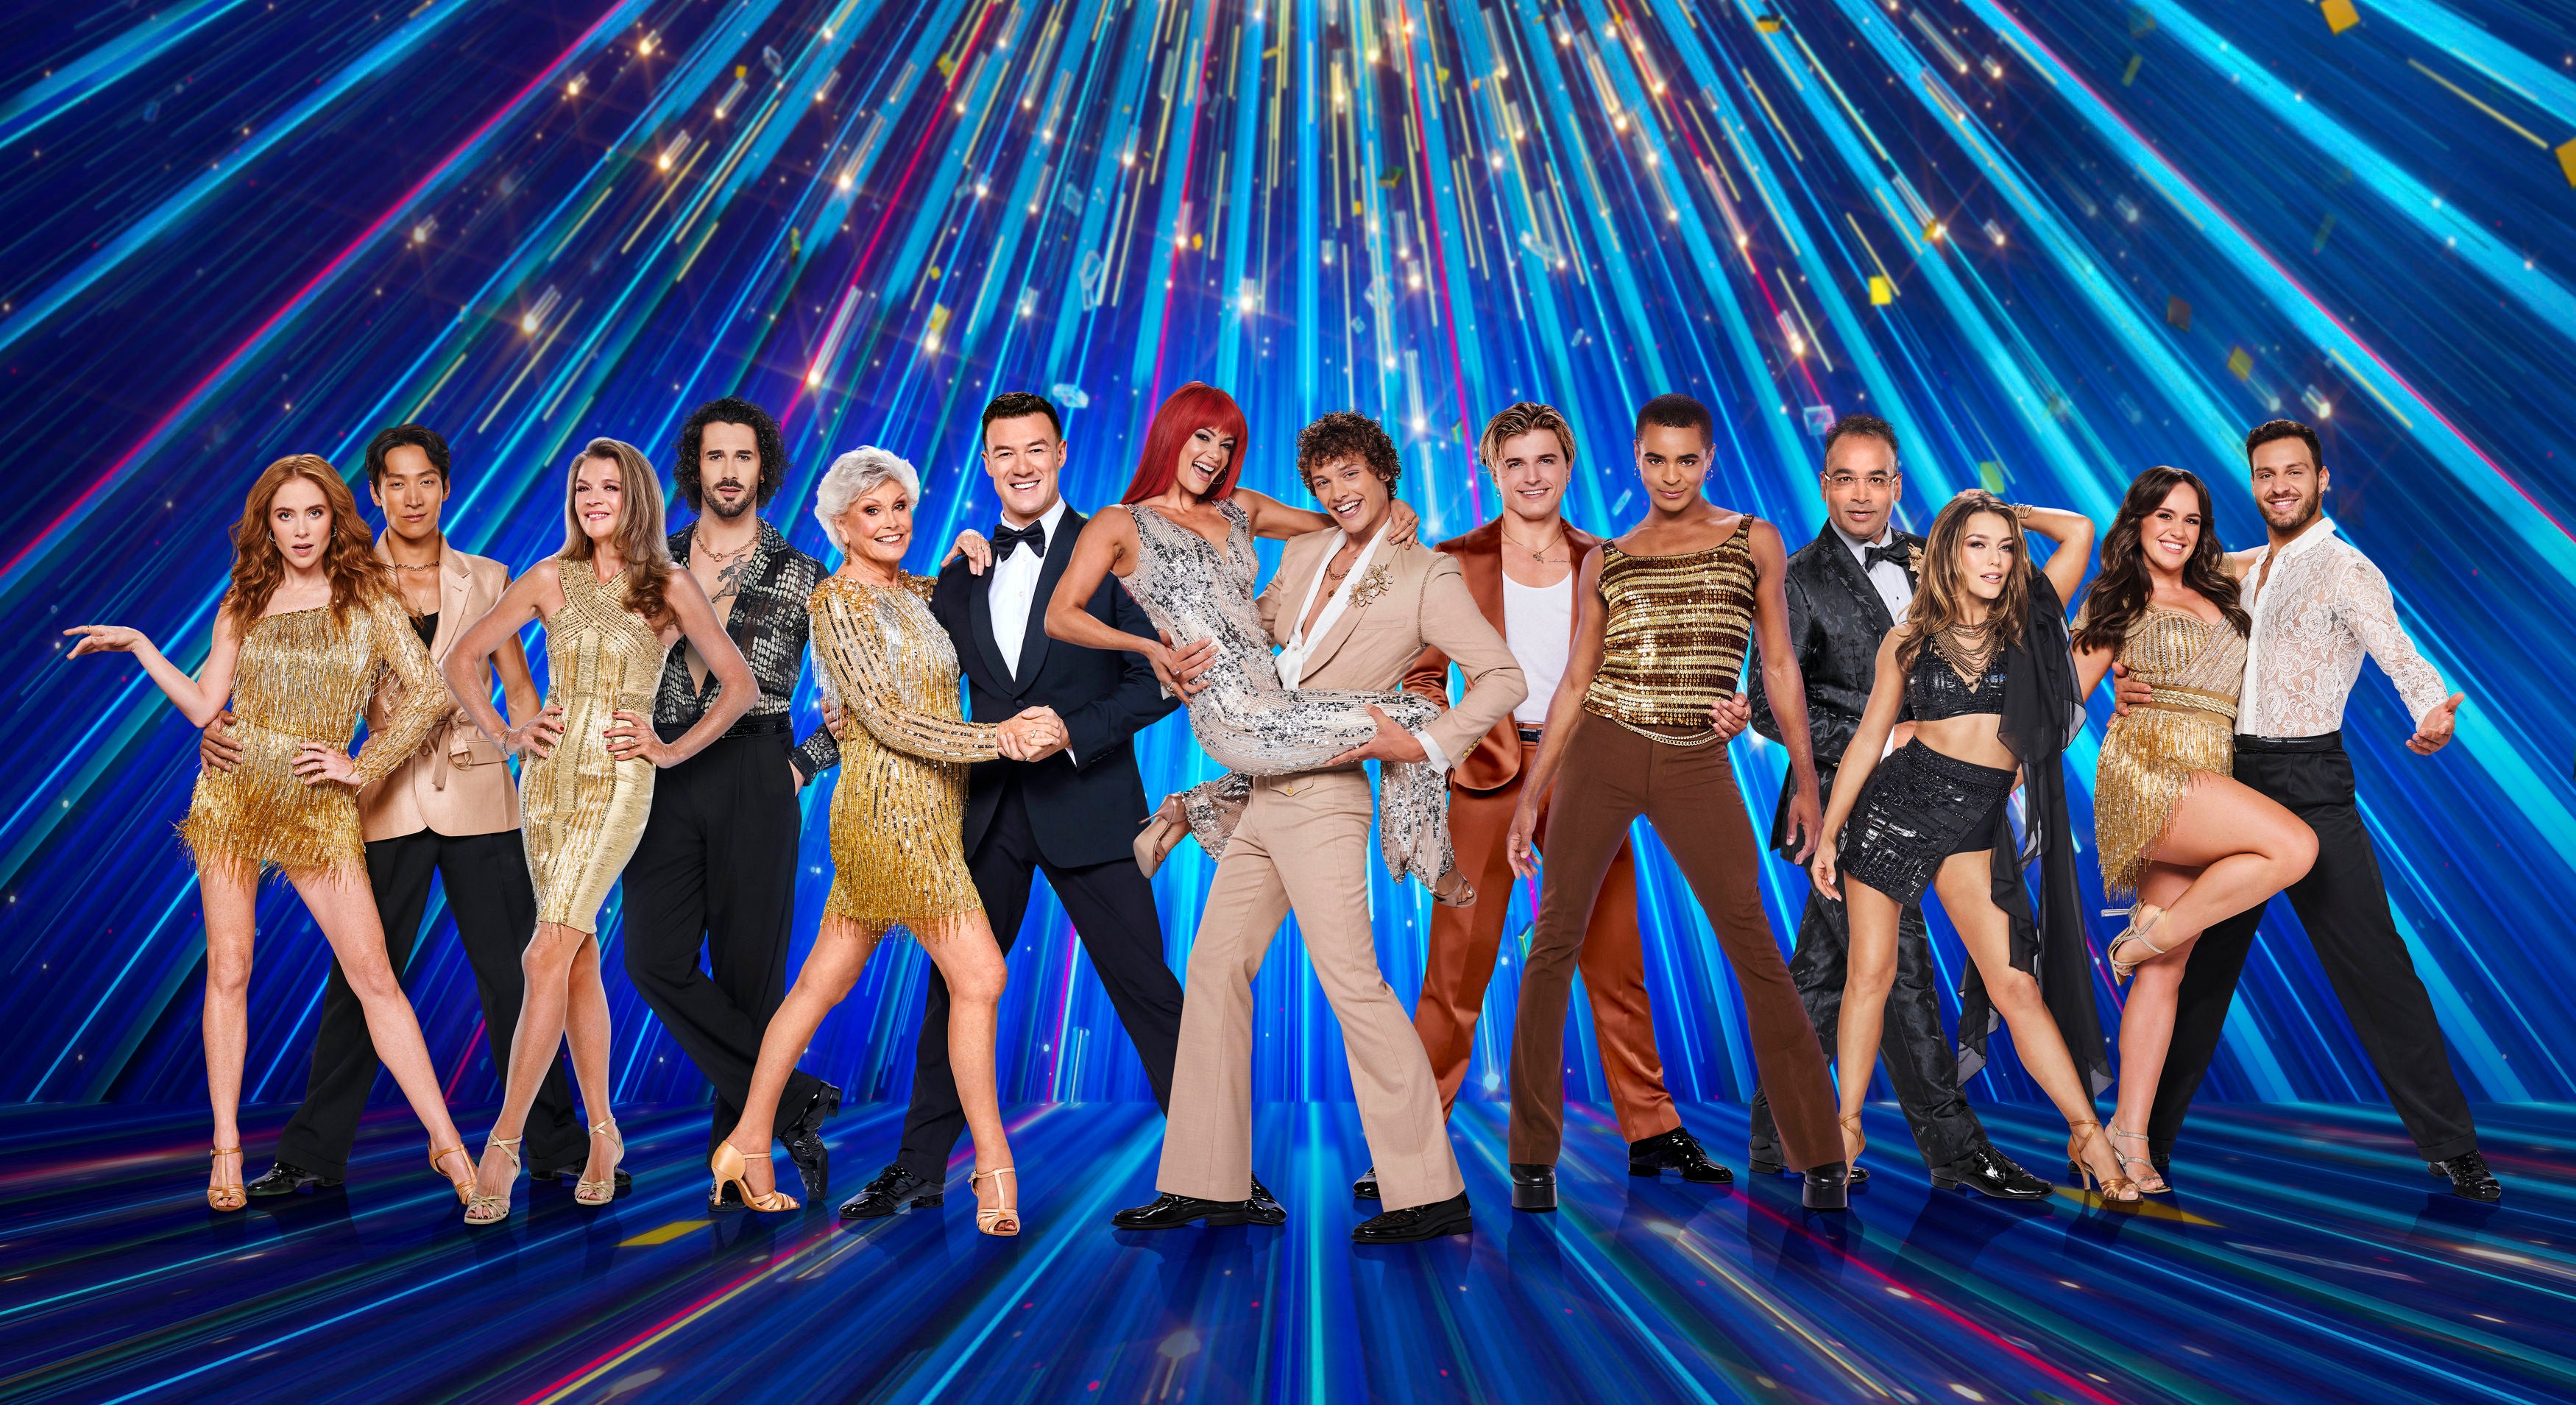 The celebrity contestants and their professional dance partners will be performing across the UK next year